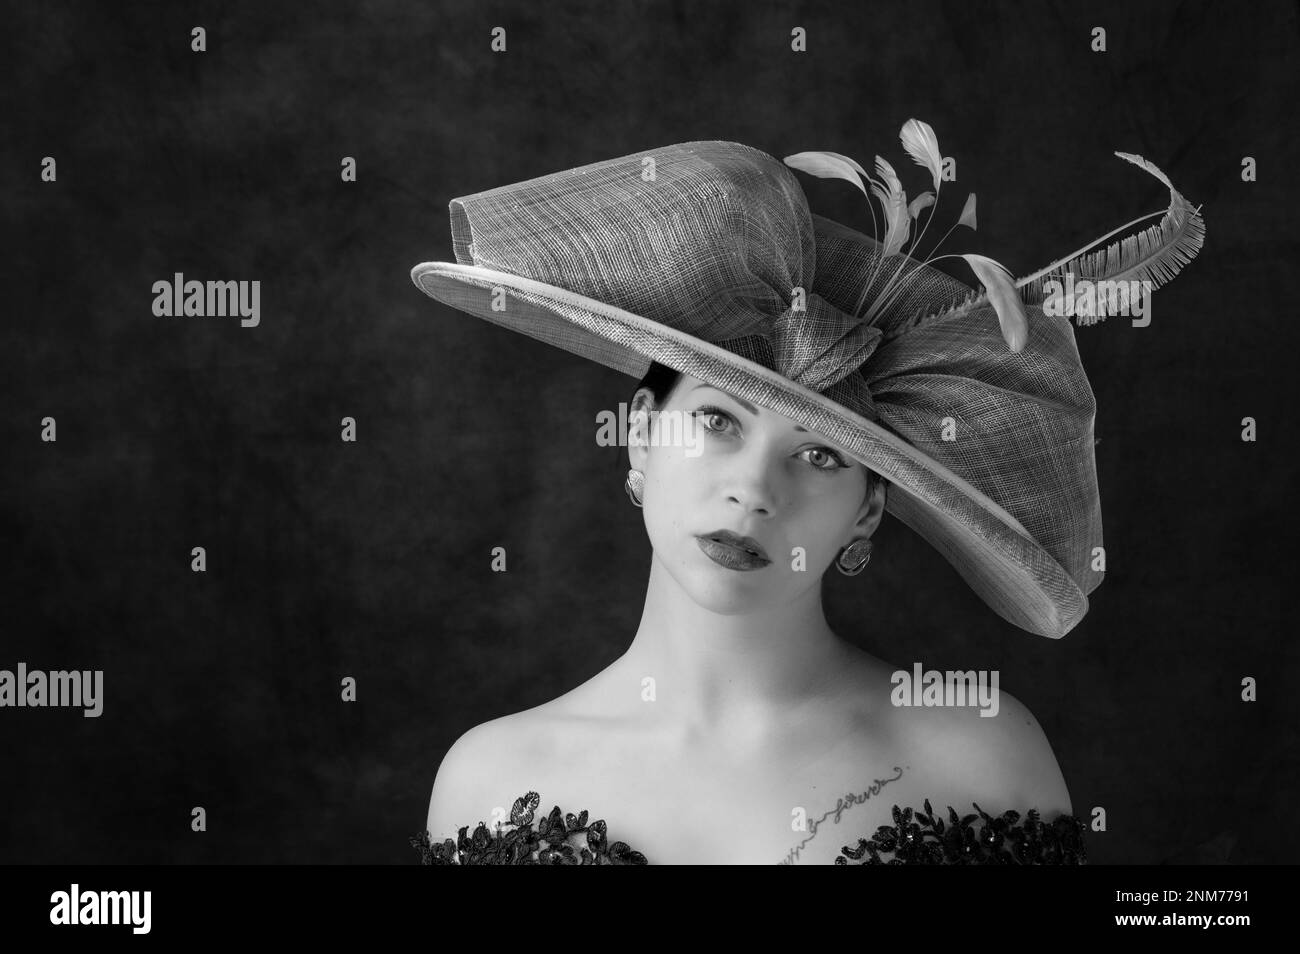 GIRL WITH HAT IN MONO IMAGE Stock Photo